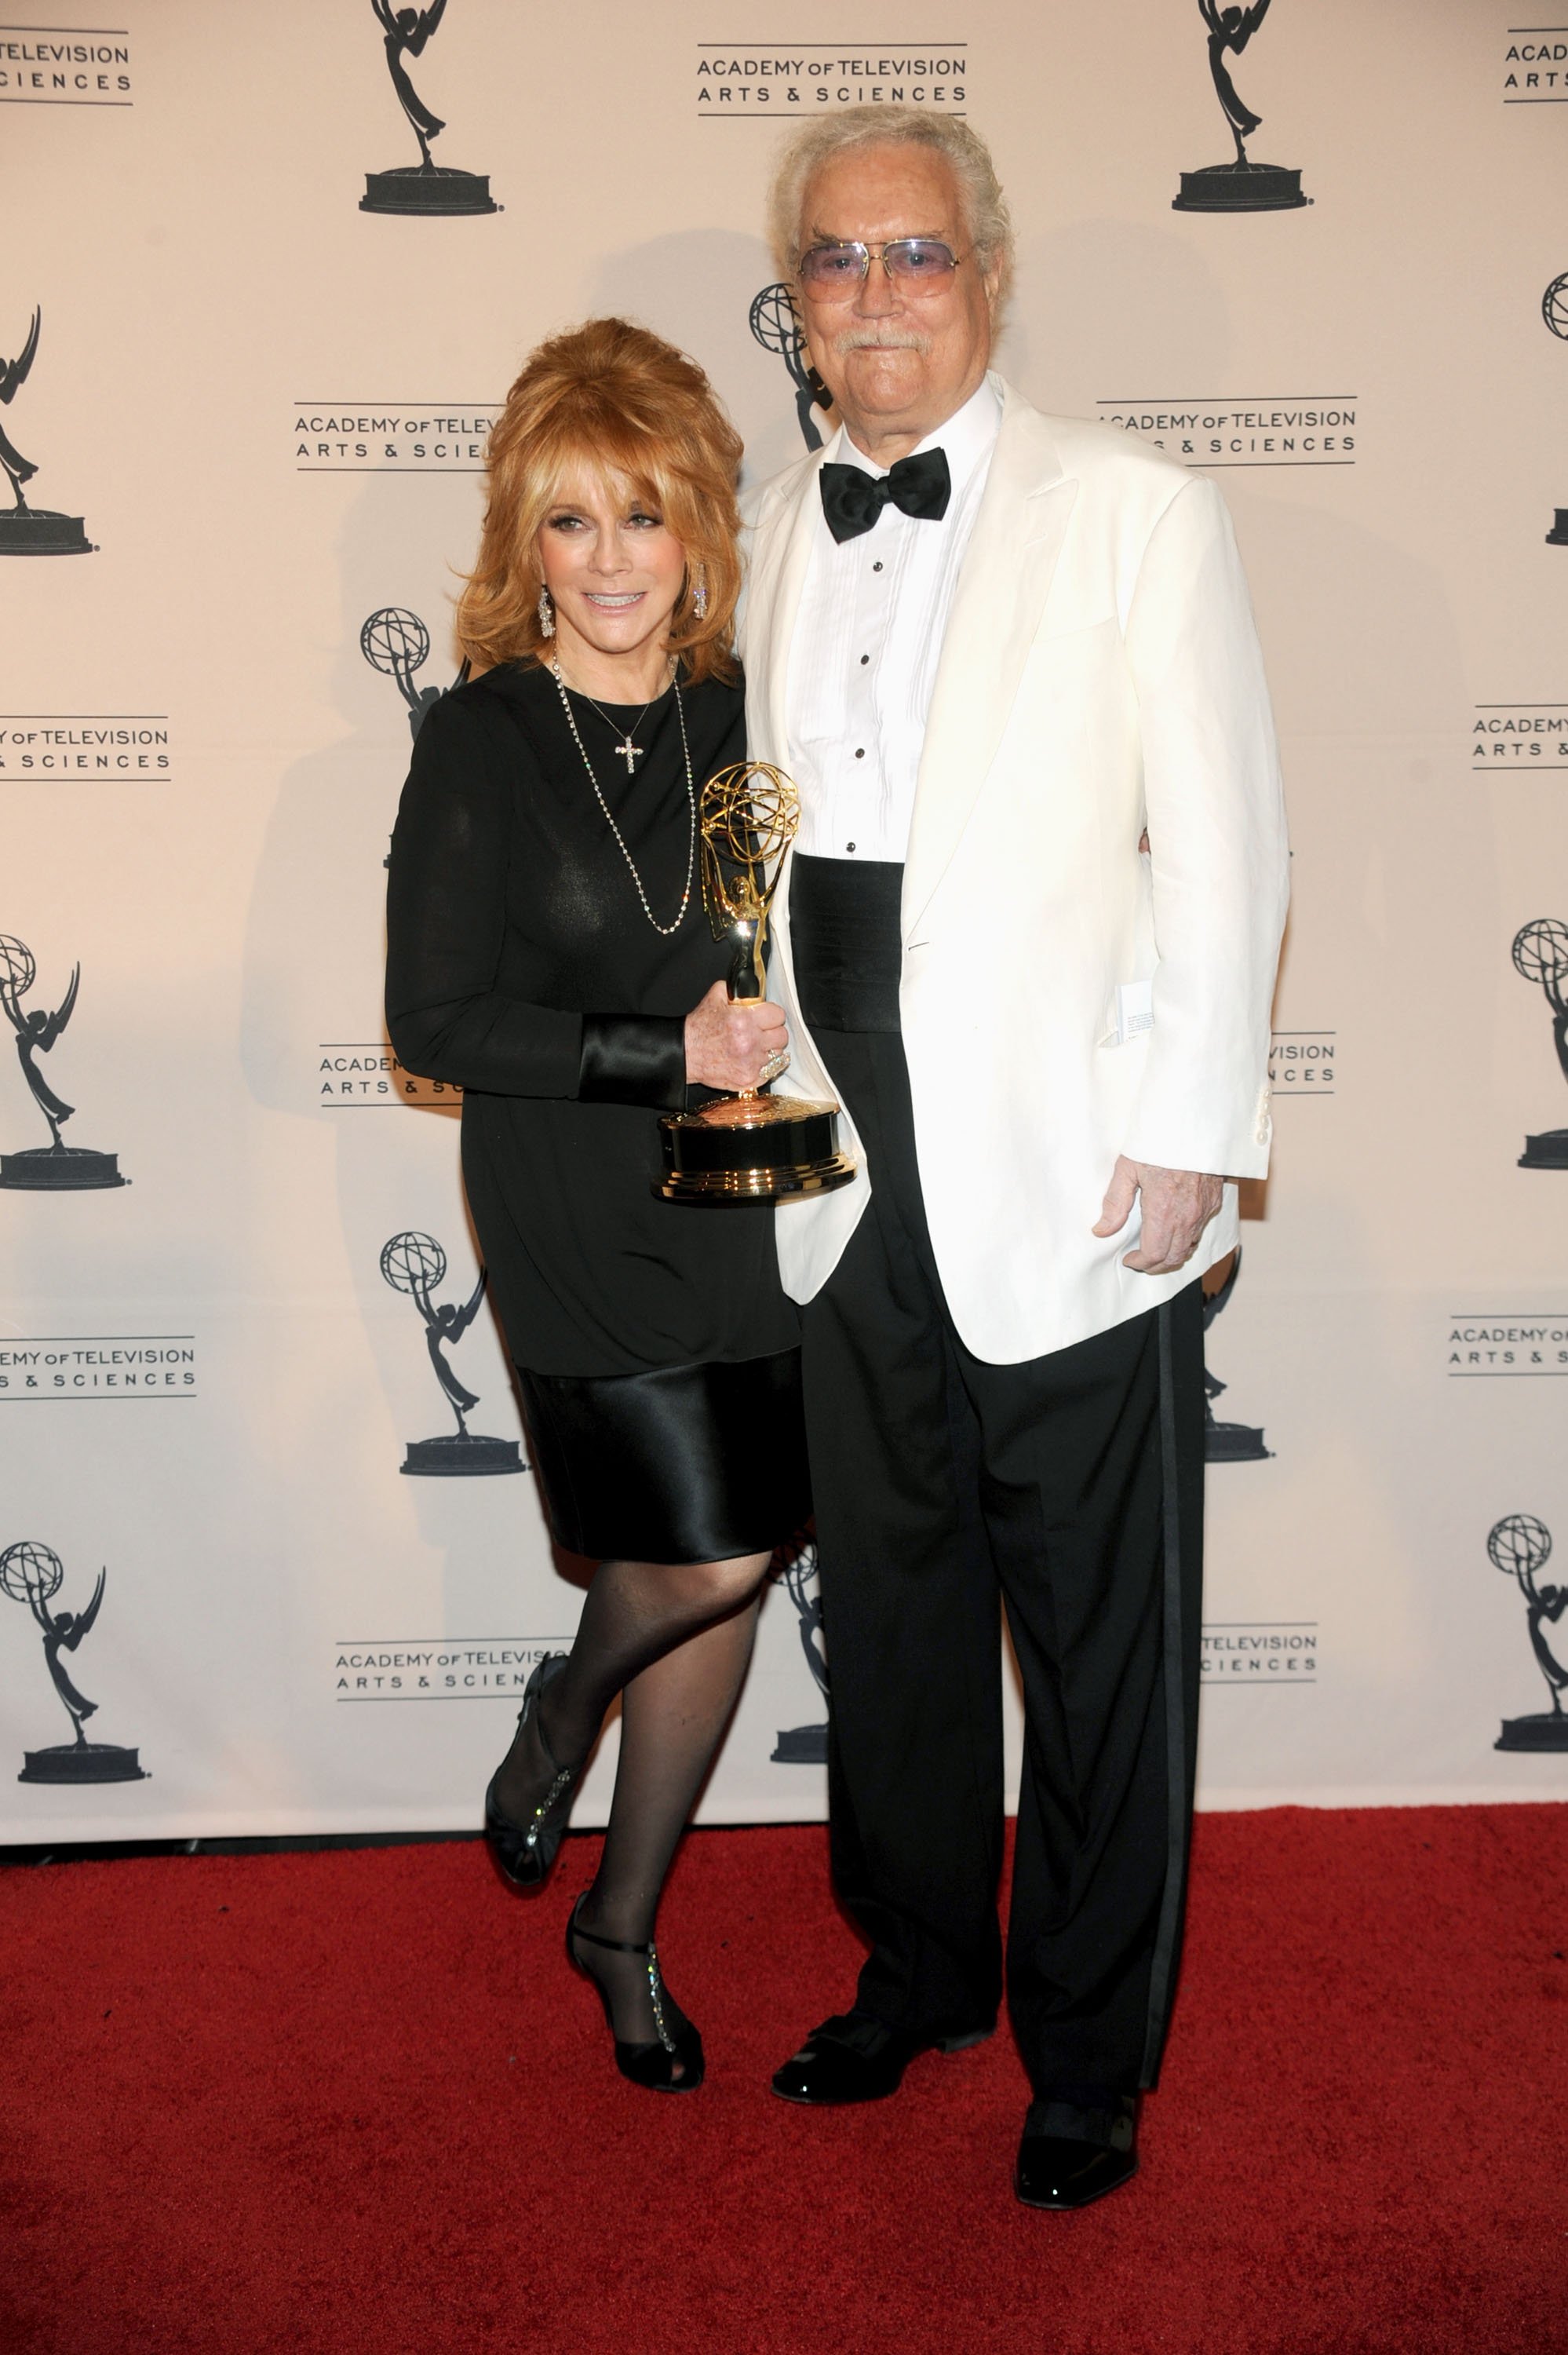 Ann-Margret and husband Roger Smith at the 2010 Creative Arts Emmy Awards at Nokia Theatre L.A. Live on August 21, 2010 in Los Angeles, California | Source: Getty Images